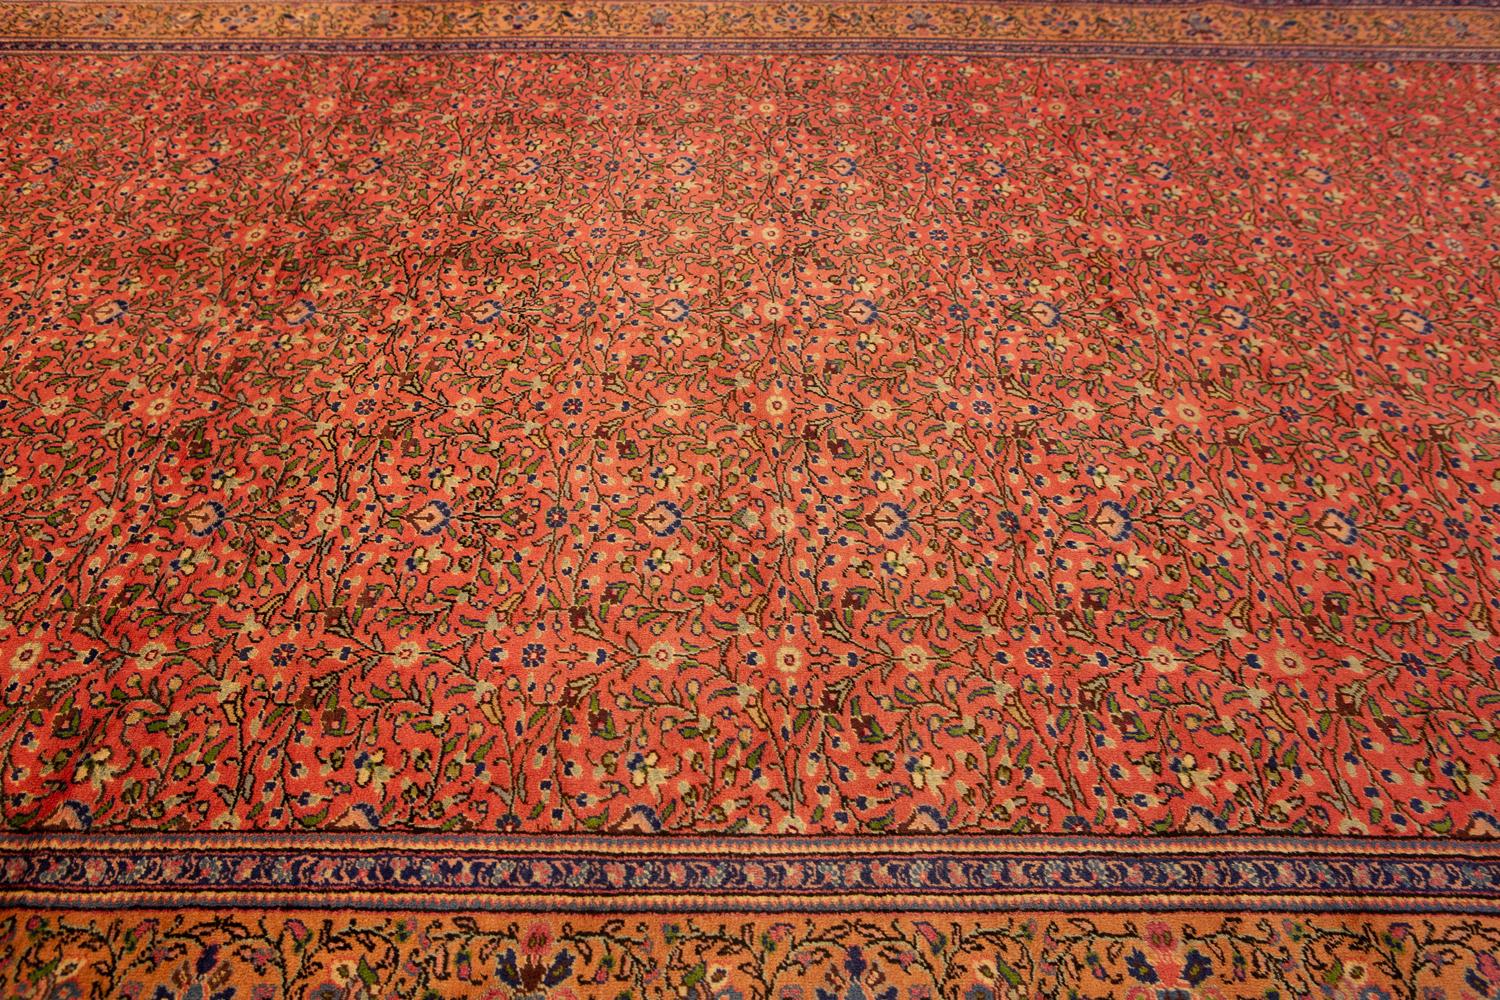 This beautiful Kayseri rug is from 1950-1970. The warp and weft of this rug is cotton and the pile is wool. The design is traditional and intricate, with a lovely floral pattern. The colors are soft and delicate, adding a touch of luxury to any